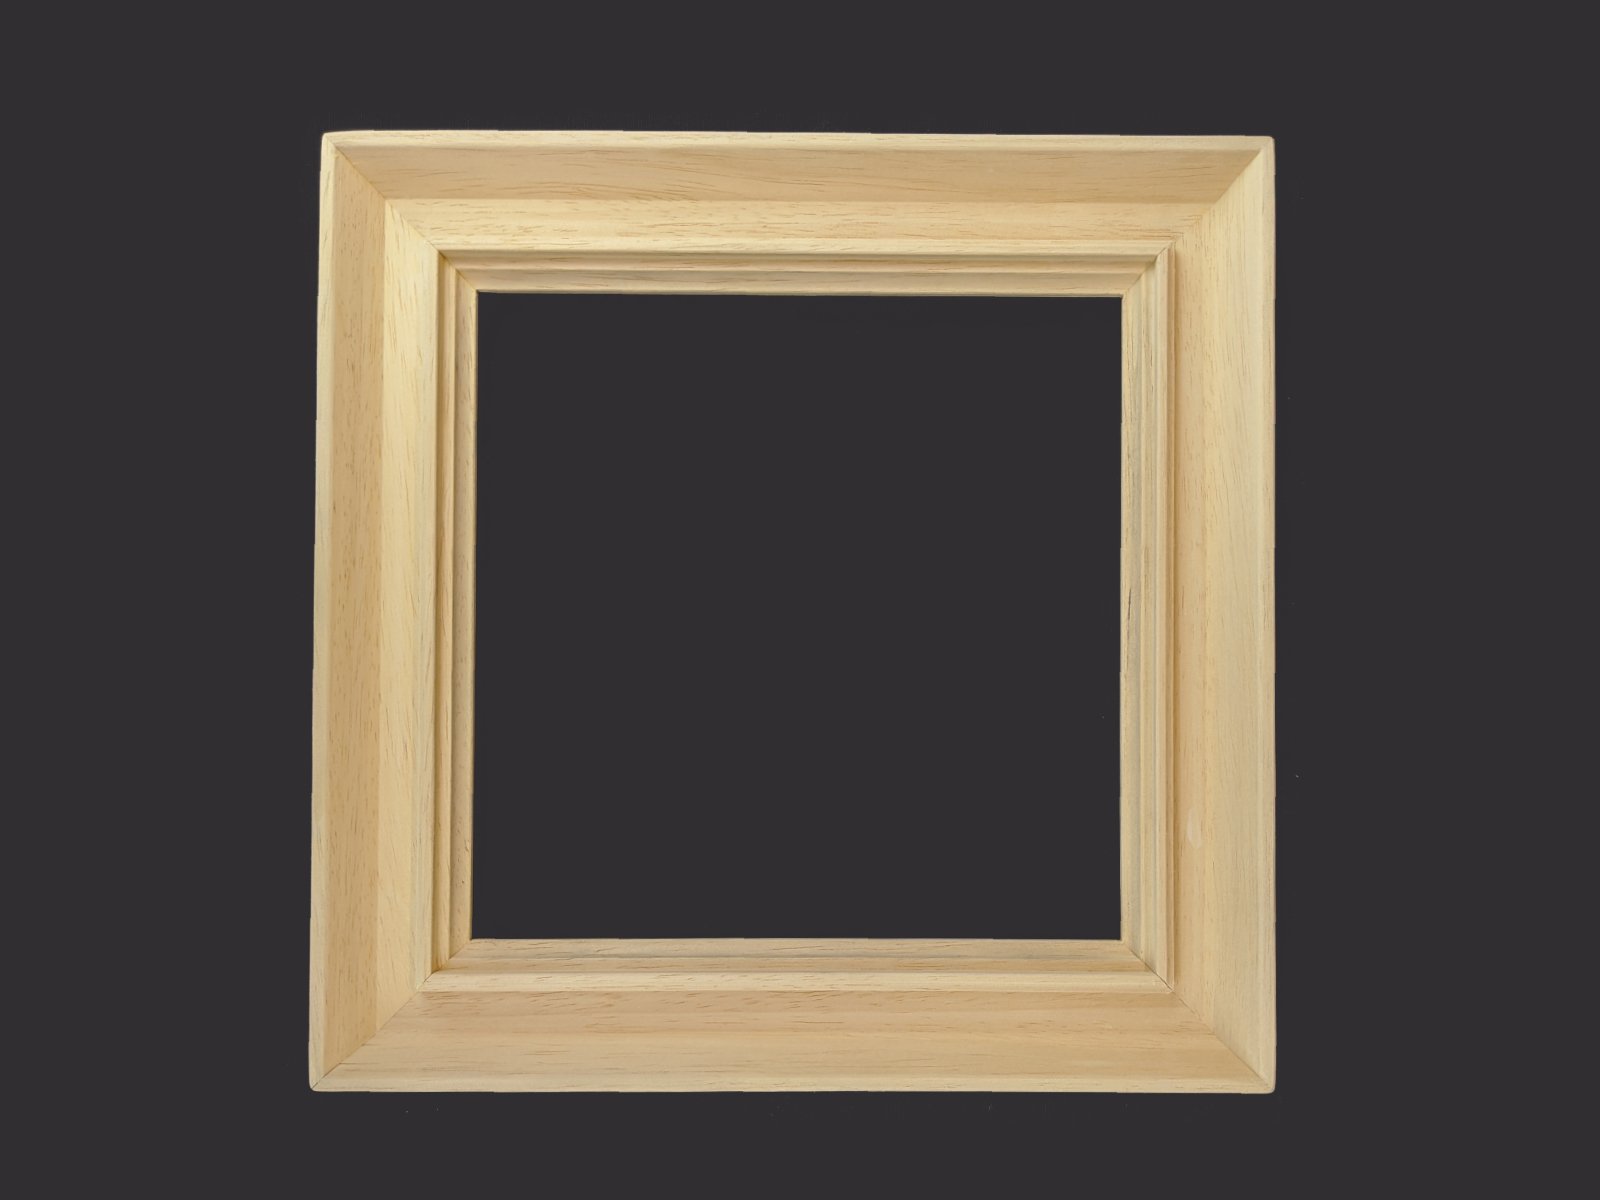 Prepared and Sanded Wild Frames – 36O, Small Square